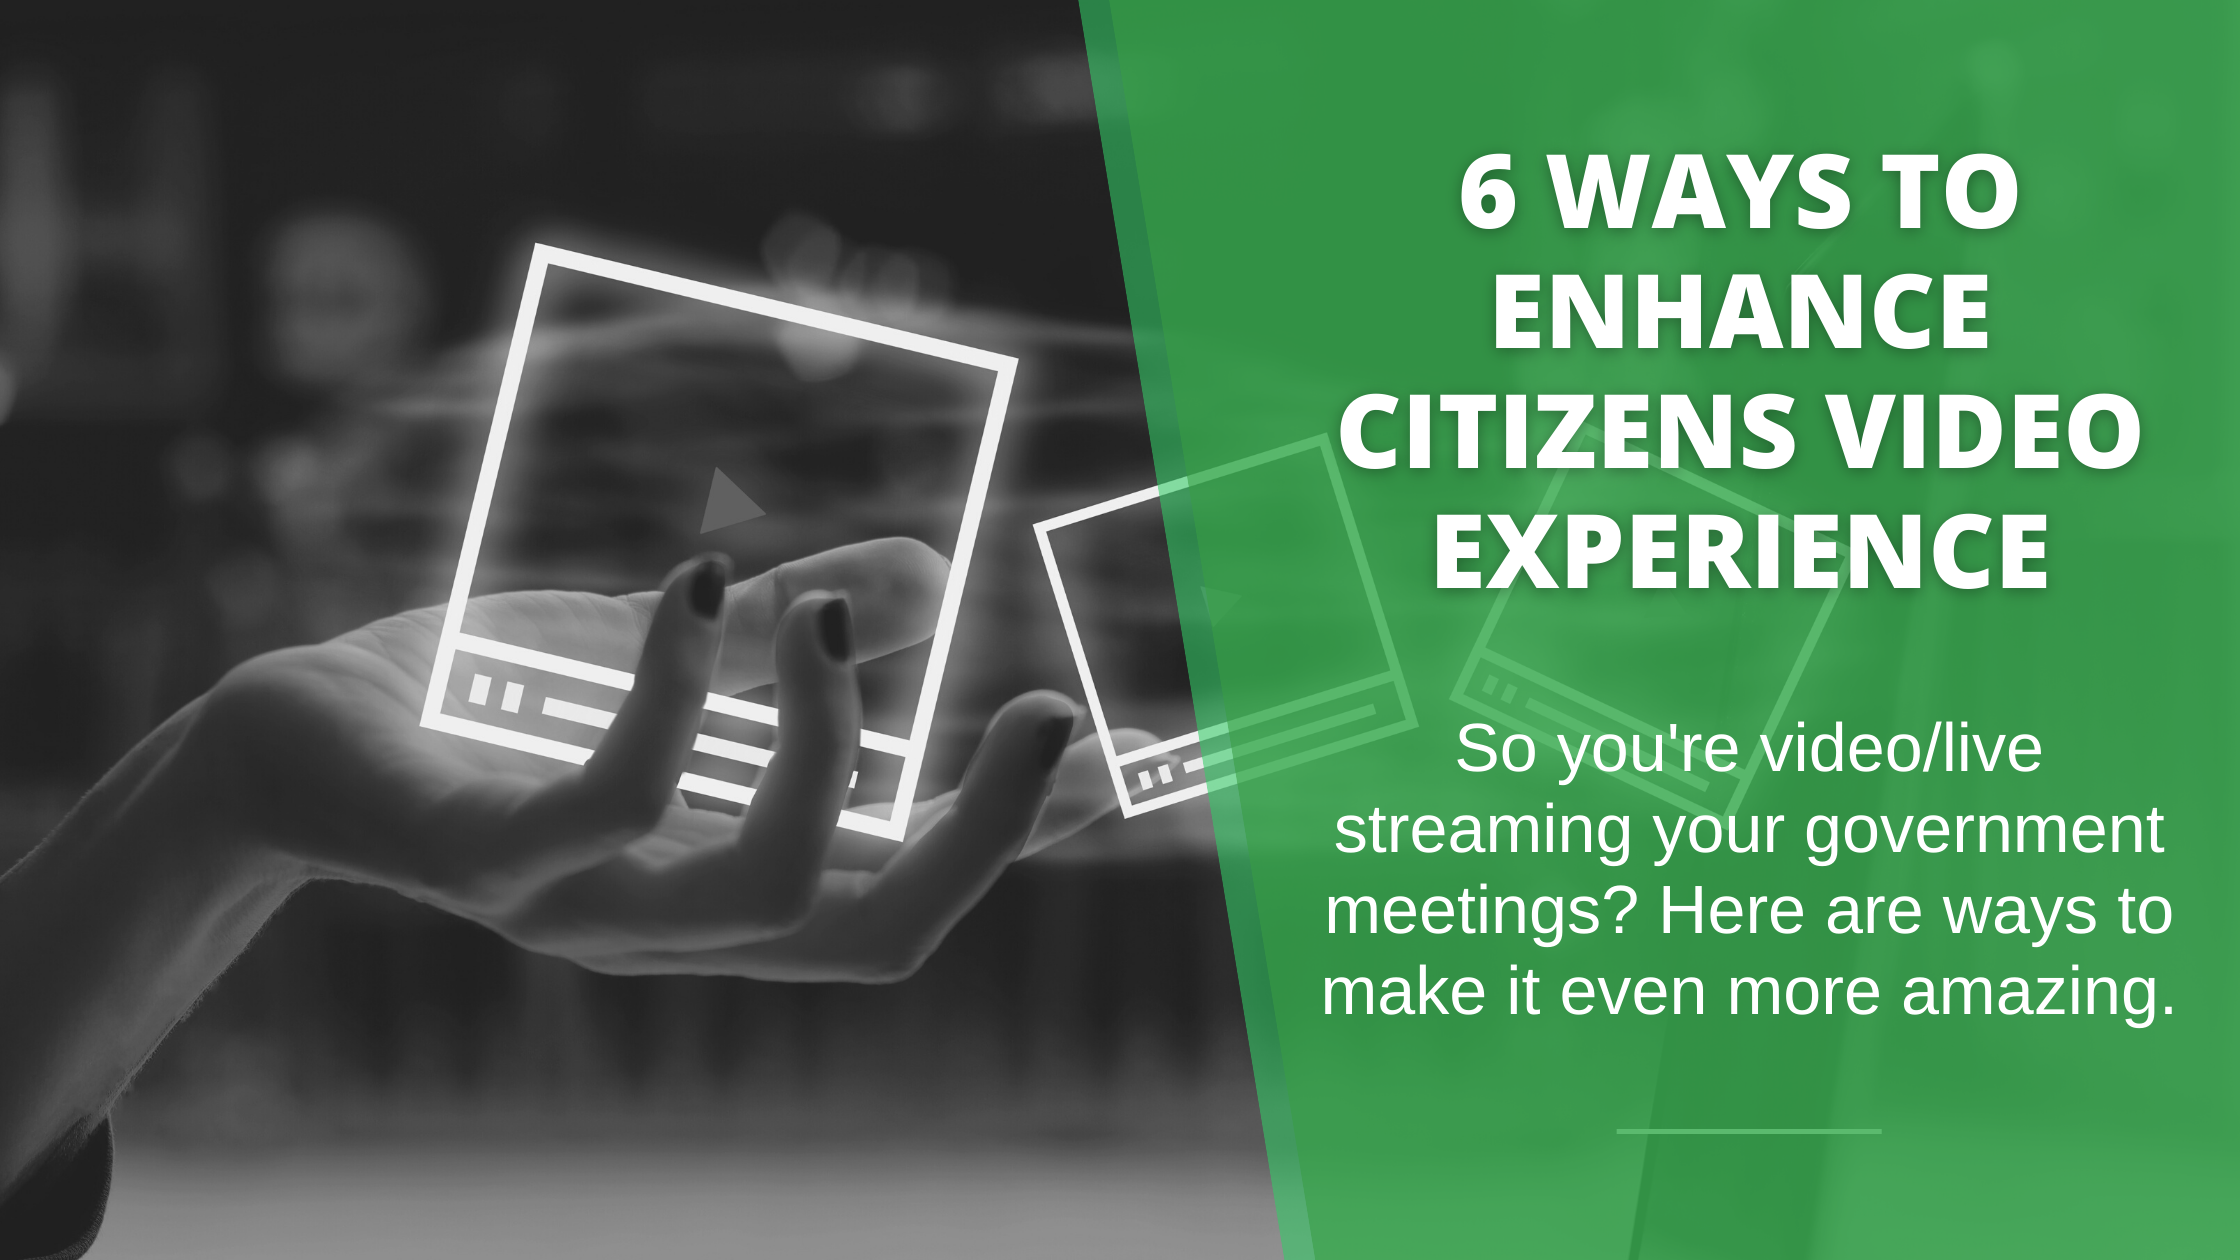 6 Ways to Enhance Citizens Video Experience Blog Graphic